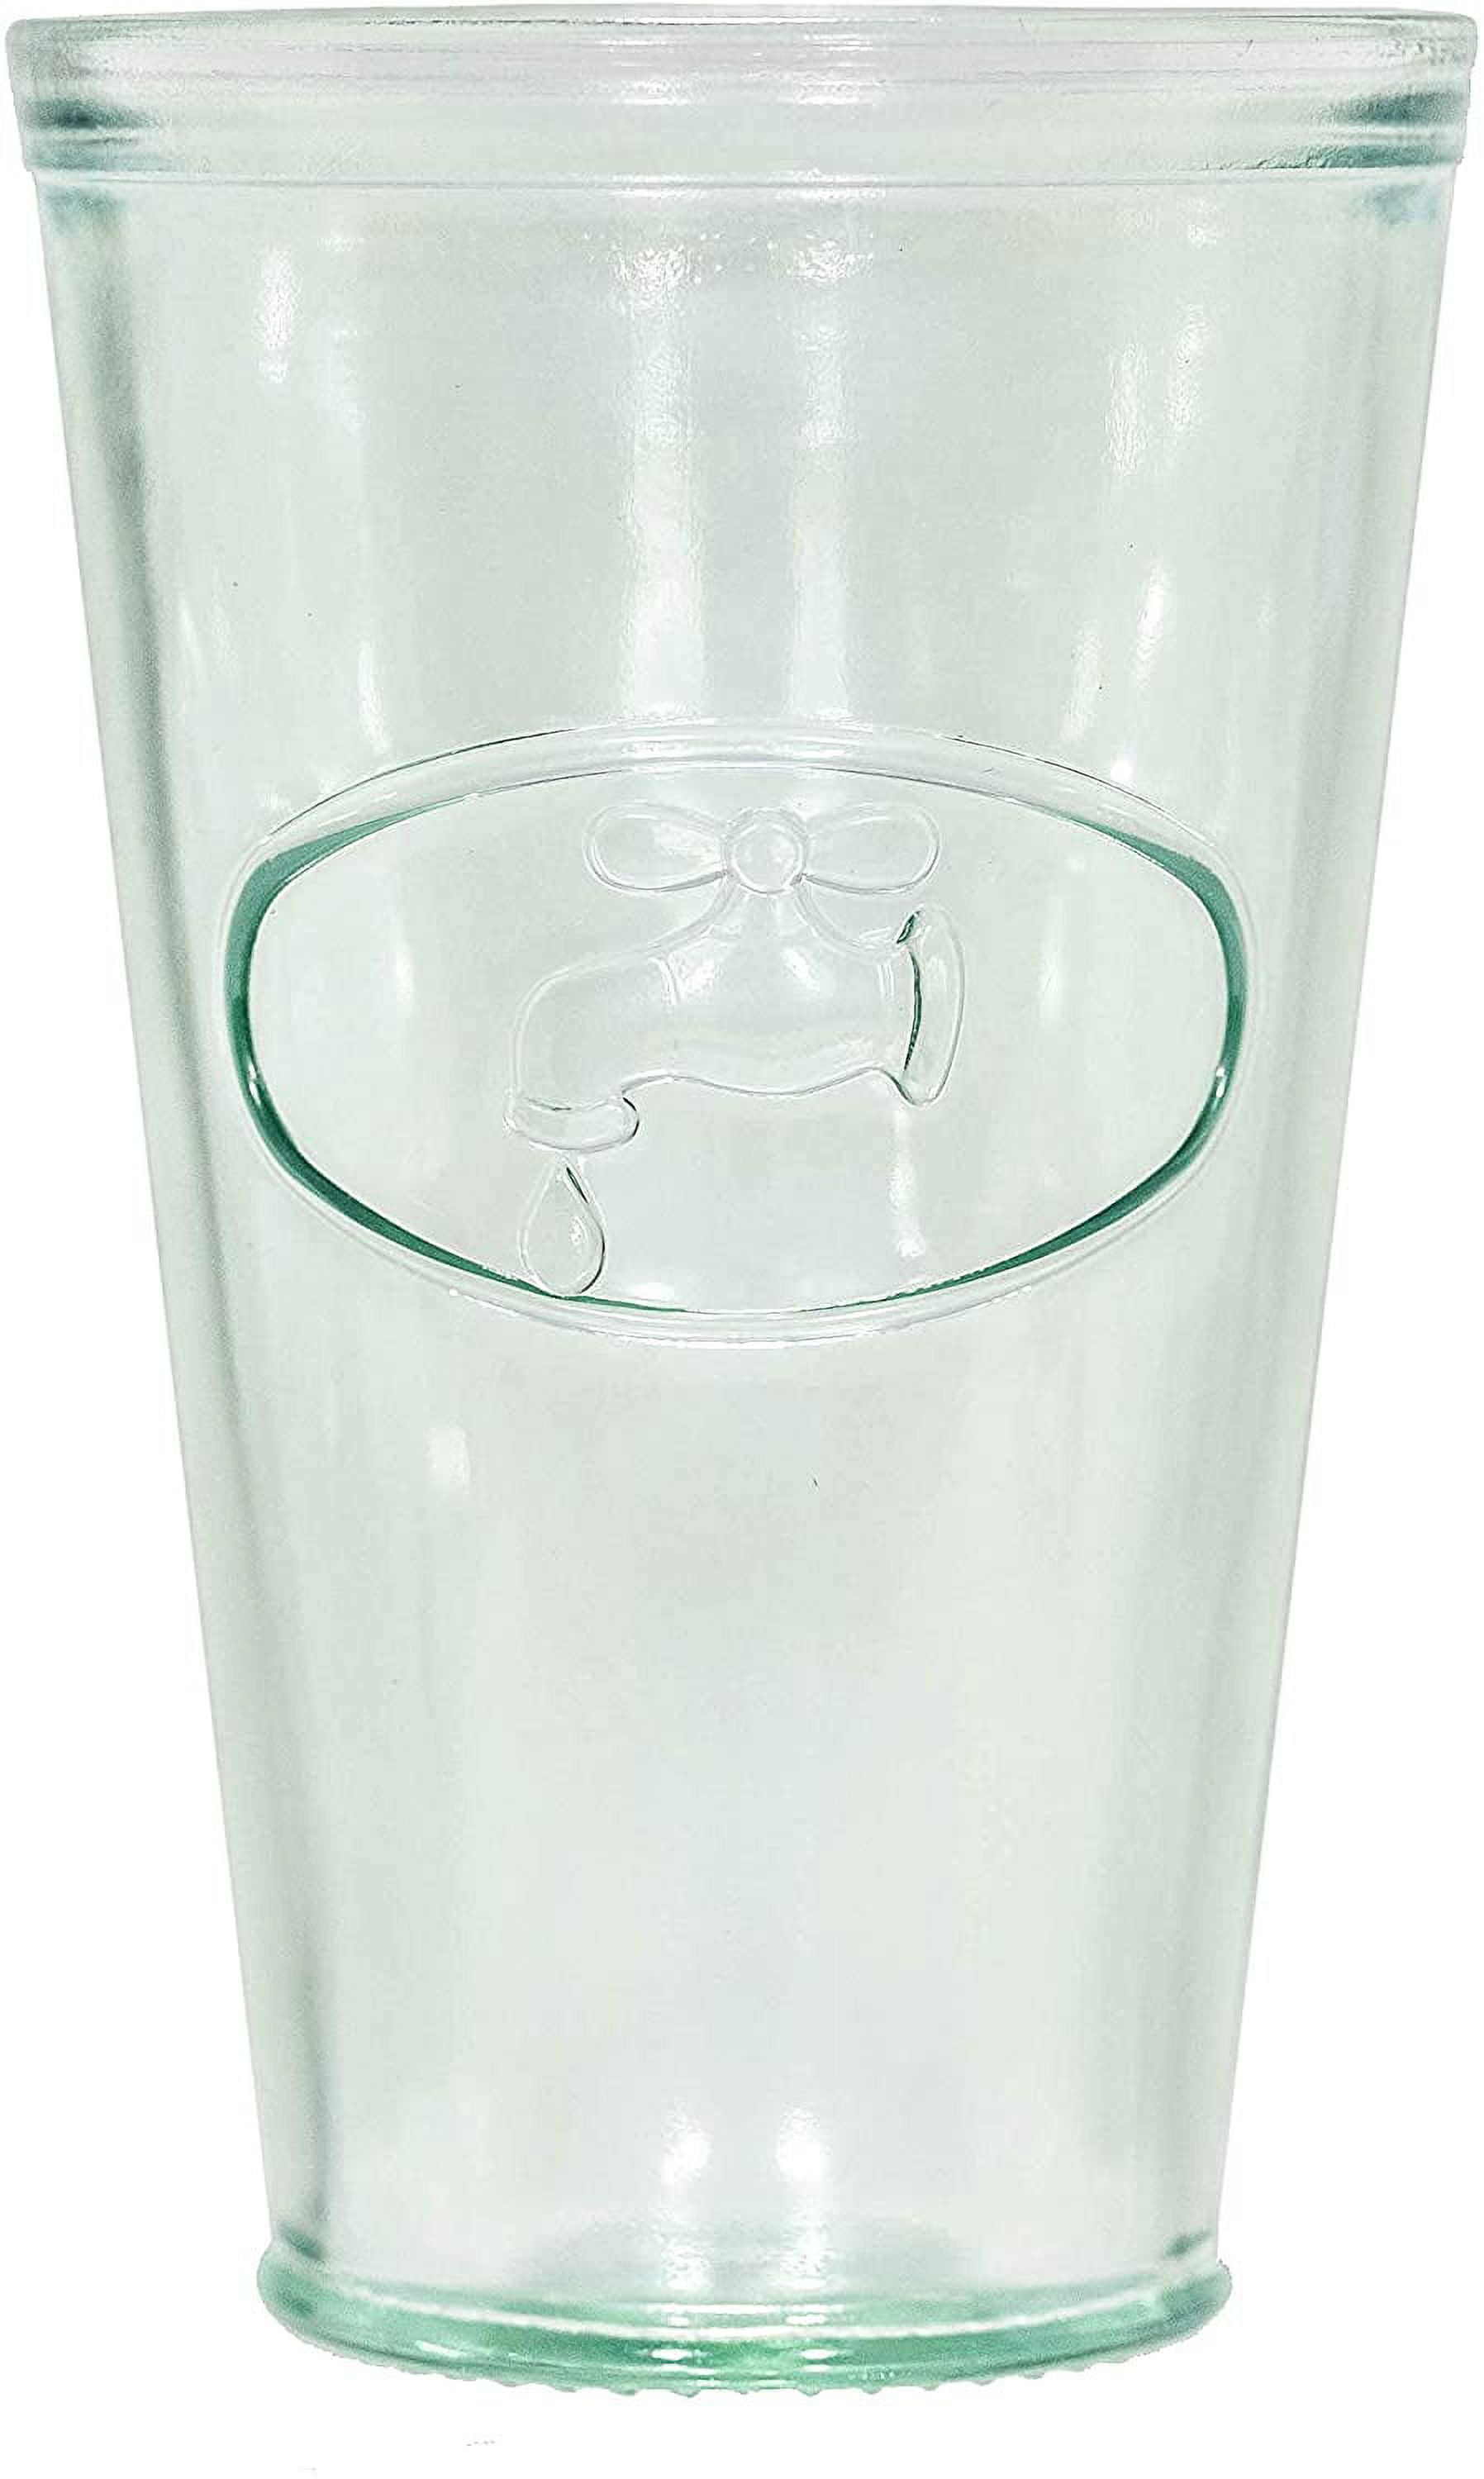 Amici Home Bee Hiball Glass | 16 Oz | Italian Made, Recycled Glass with  Green Tint | Drinking Glass …See more Amici Home Bee Hiball Glass | 16 Oz 